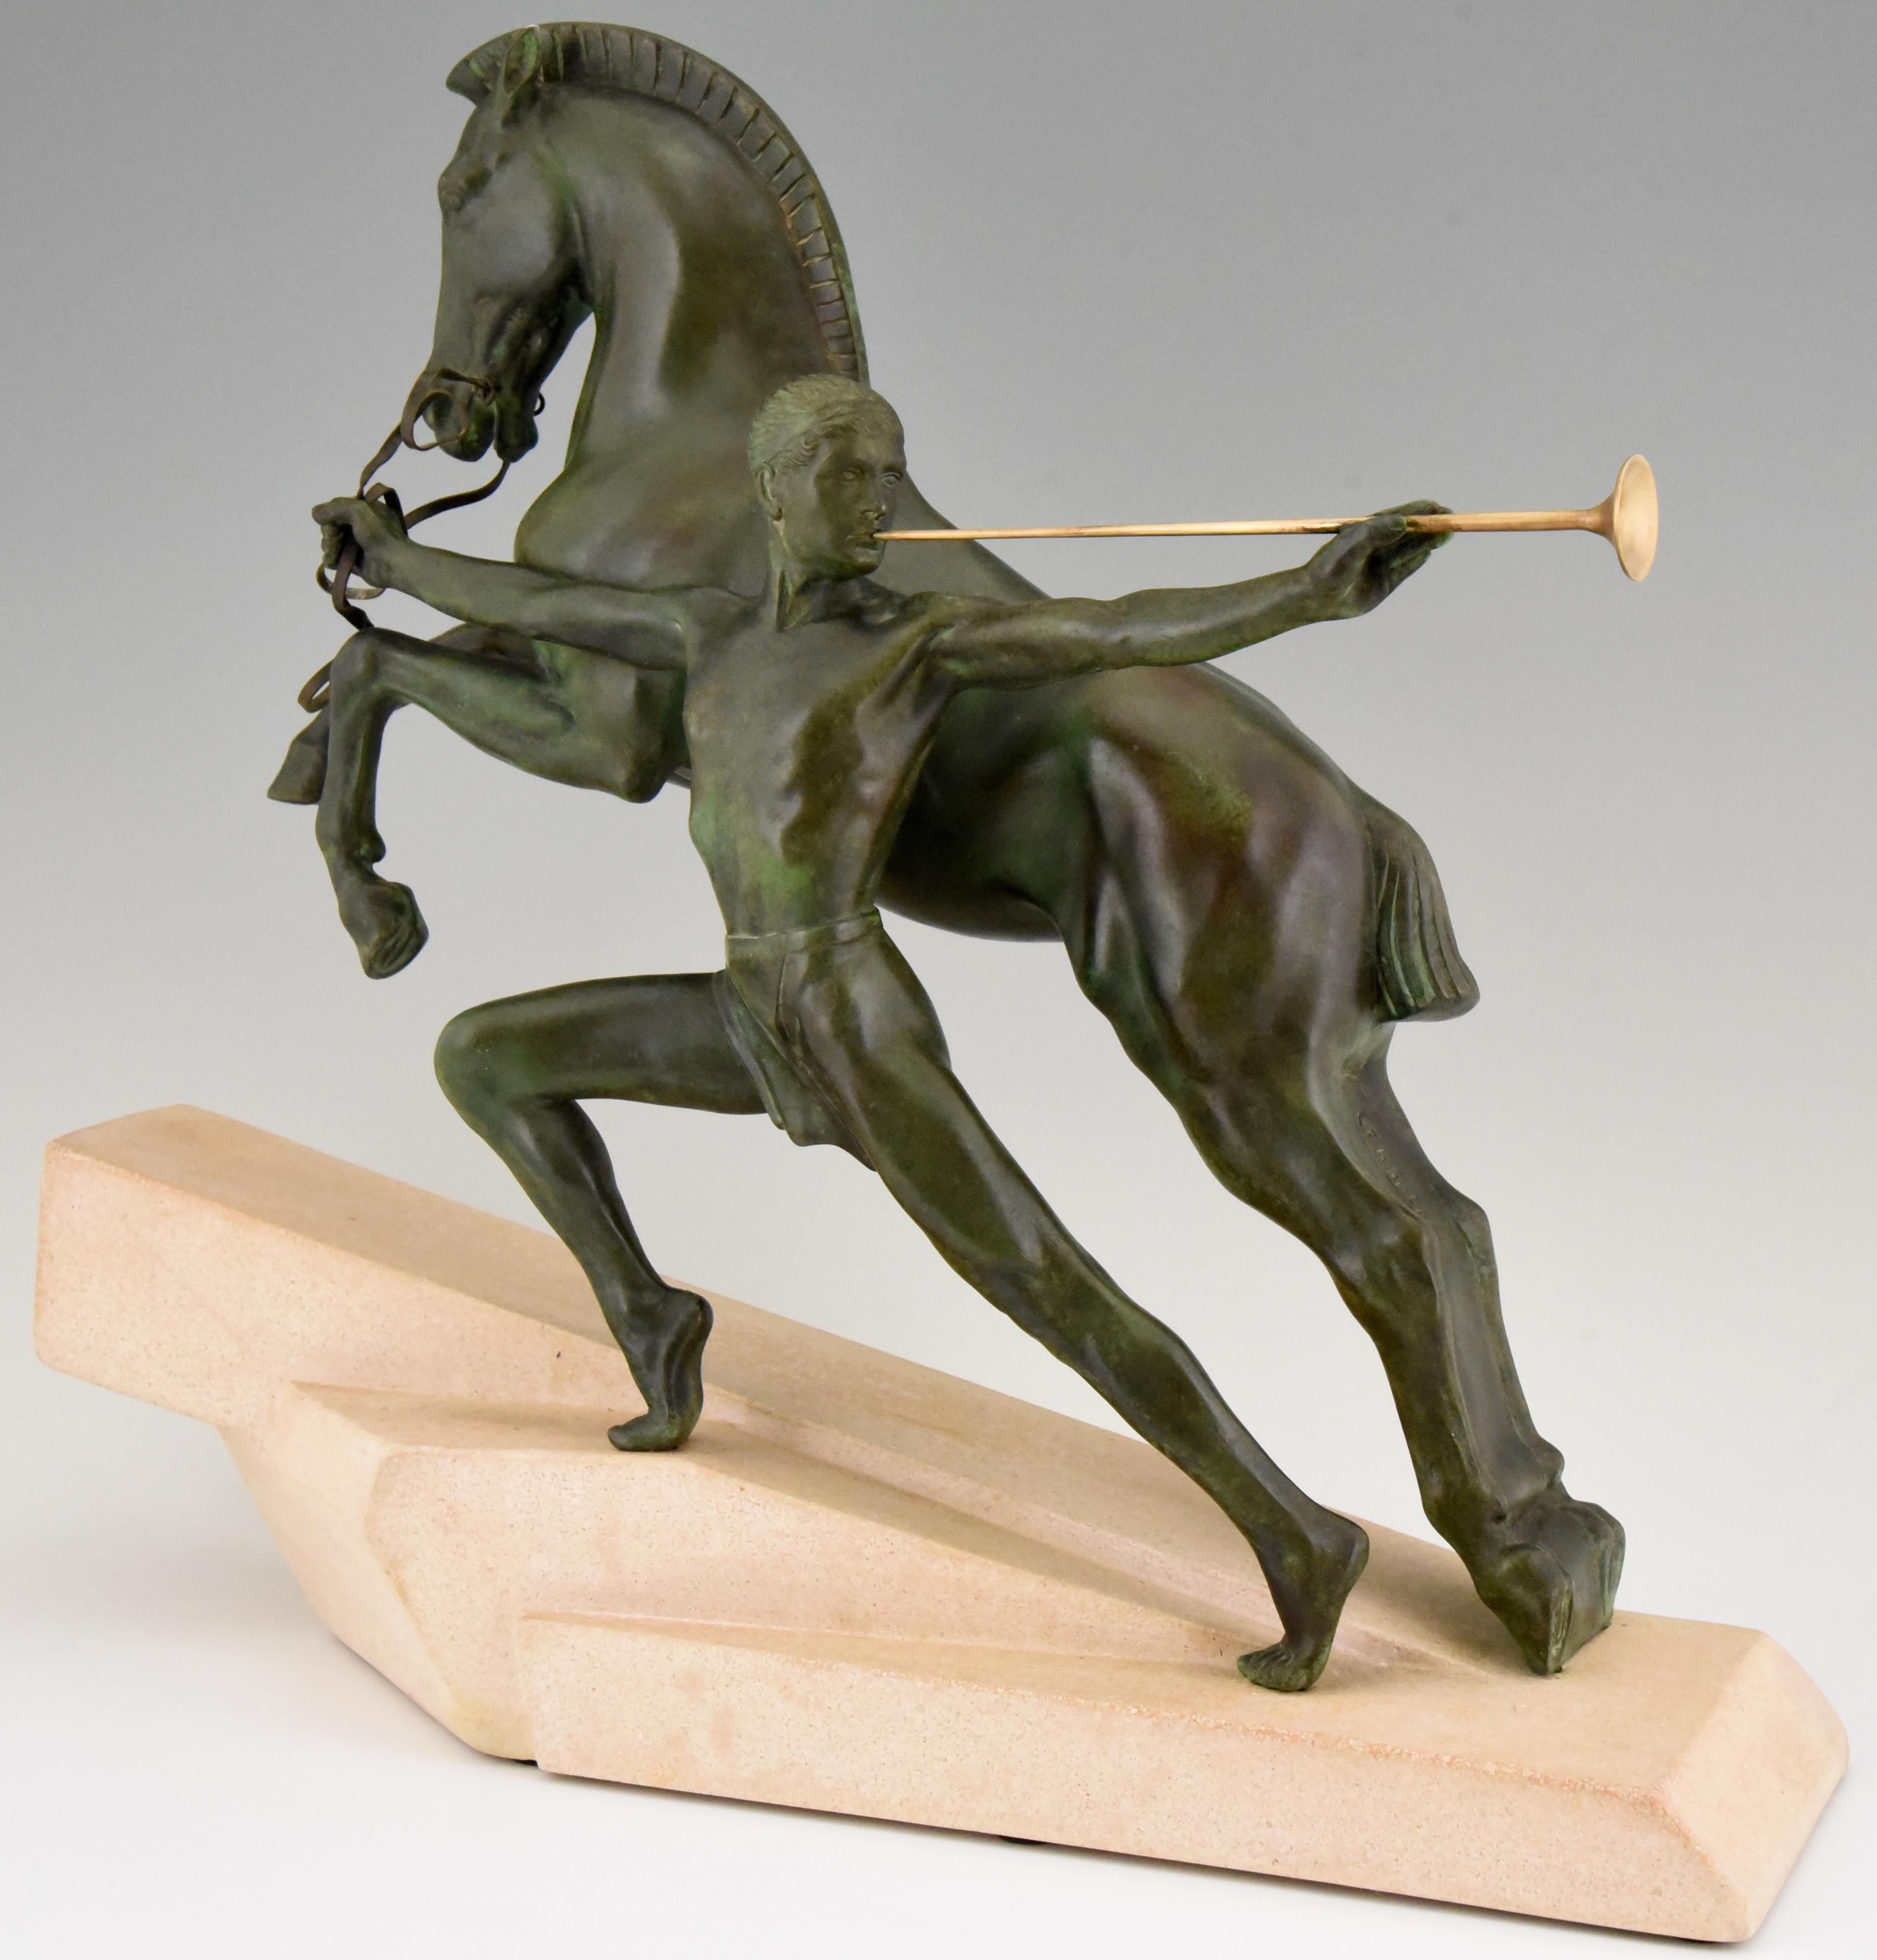 Impressive Art Deco group of a man with trumpet and a horse. This sculpture is signed by C. Charles and cast at the Max Le Verrier foundry. The title of the work is l'Appel or The Call. Patinated Art metal on a sandstone base. France 1930. 

“The